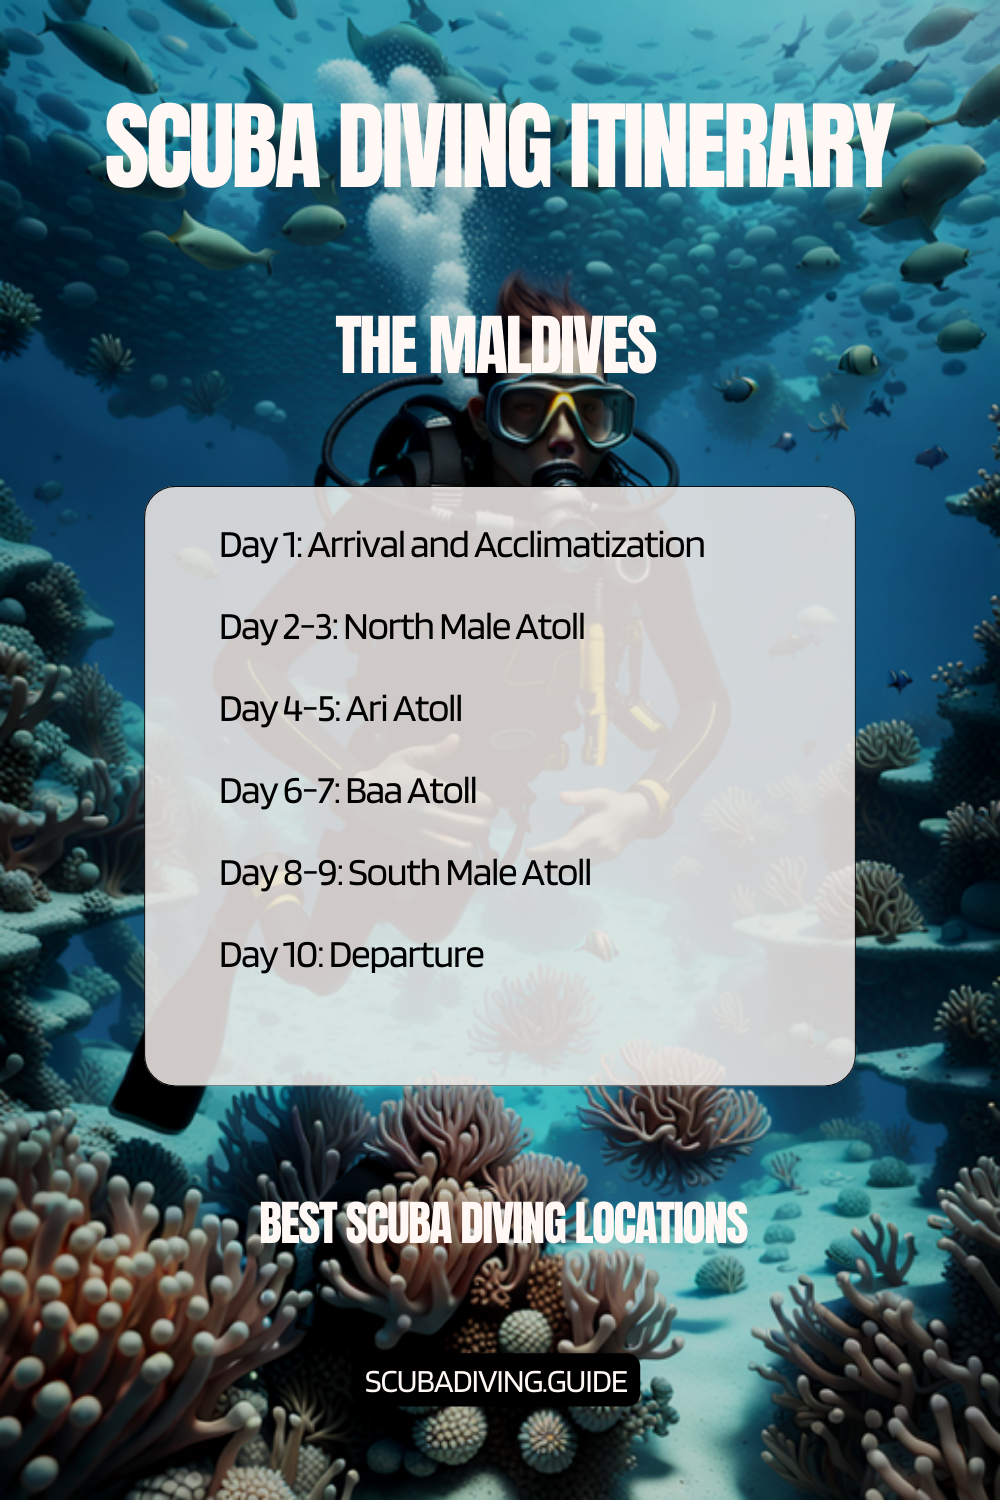 Maldives Recommended Scuba Diving Itinerary